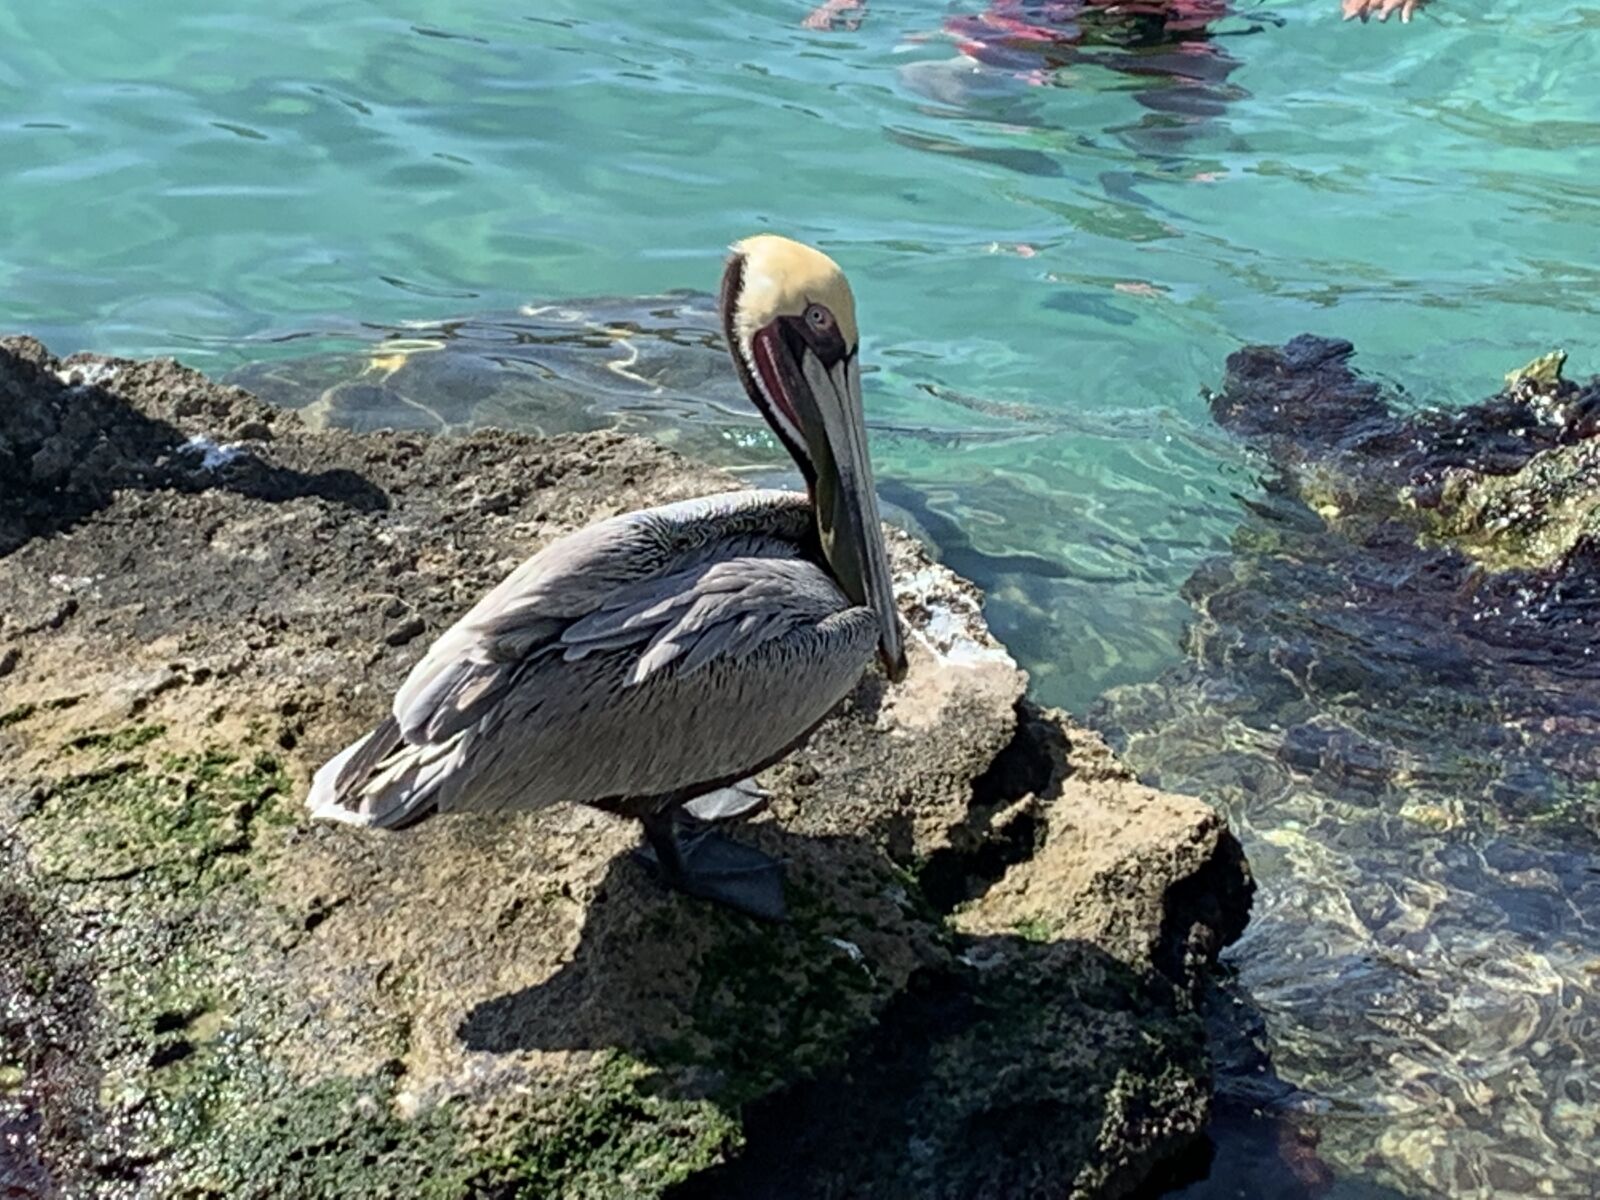 Apple iPhone XR sample photo. Pelican, sea, water photography